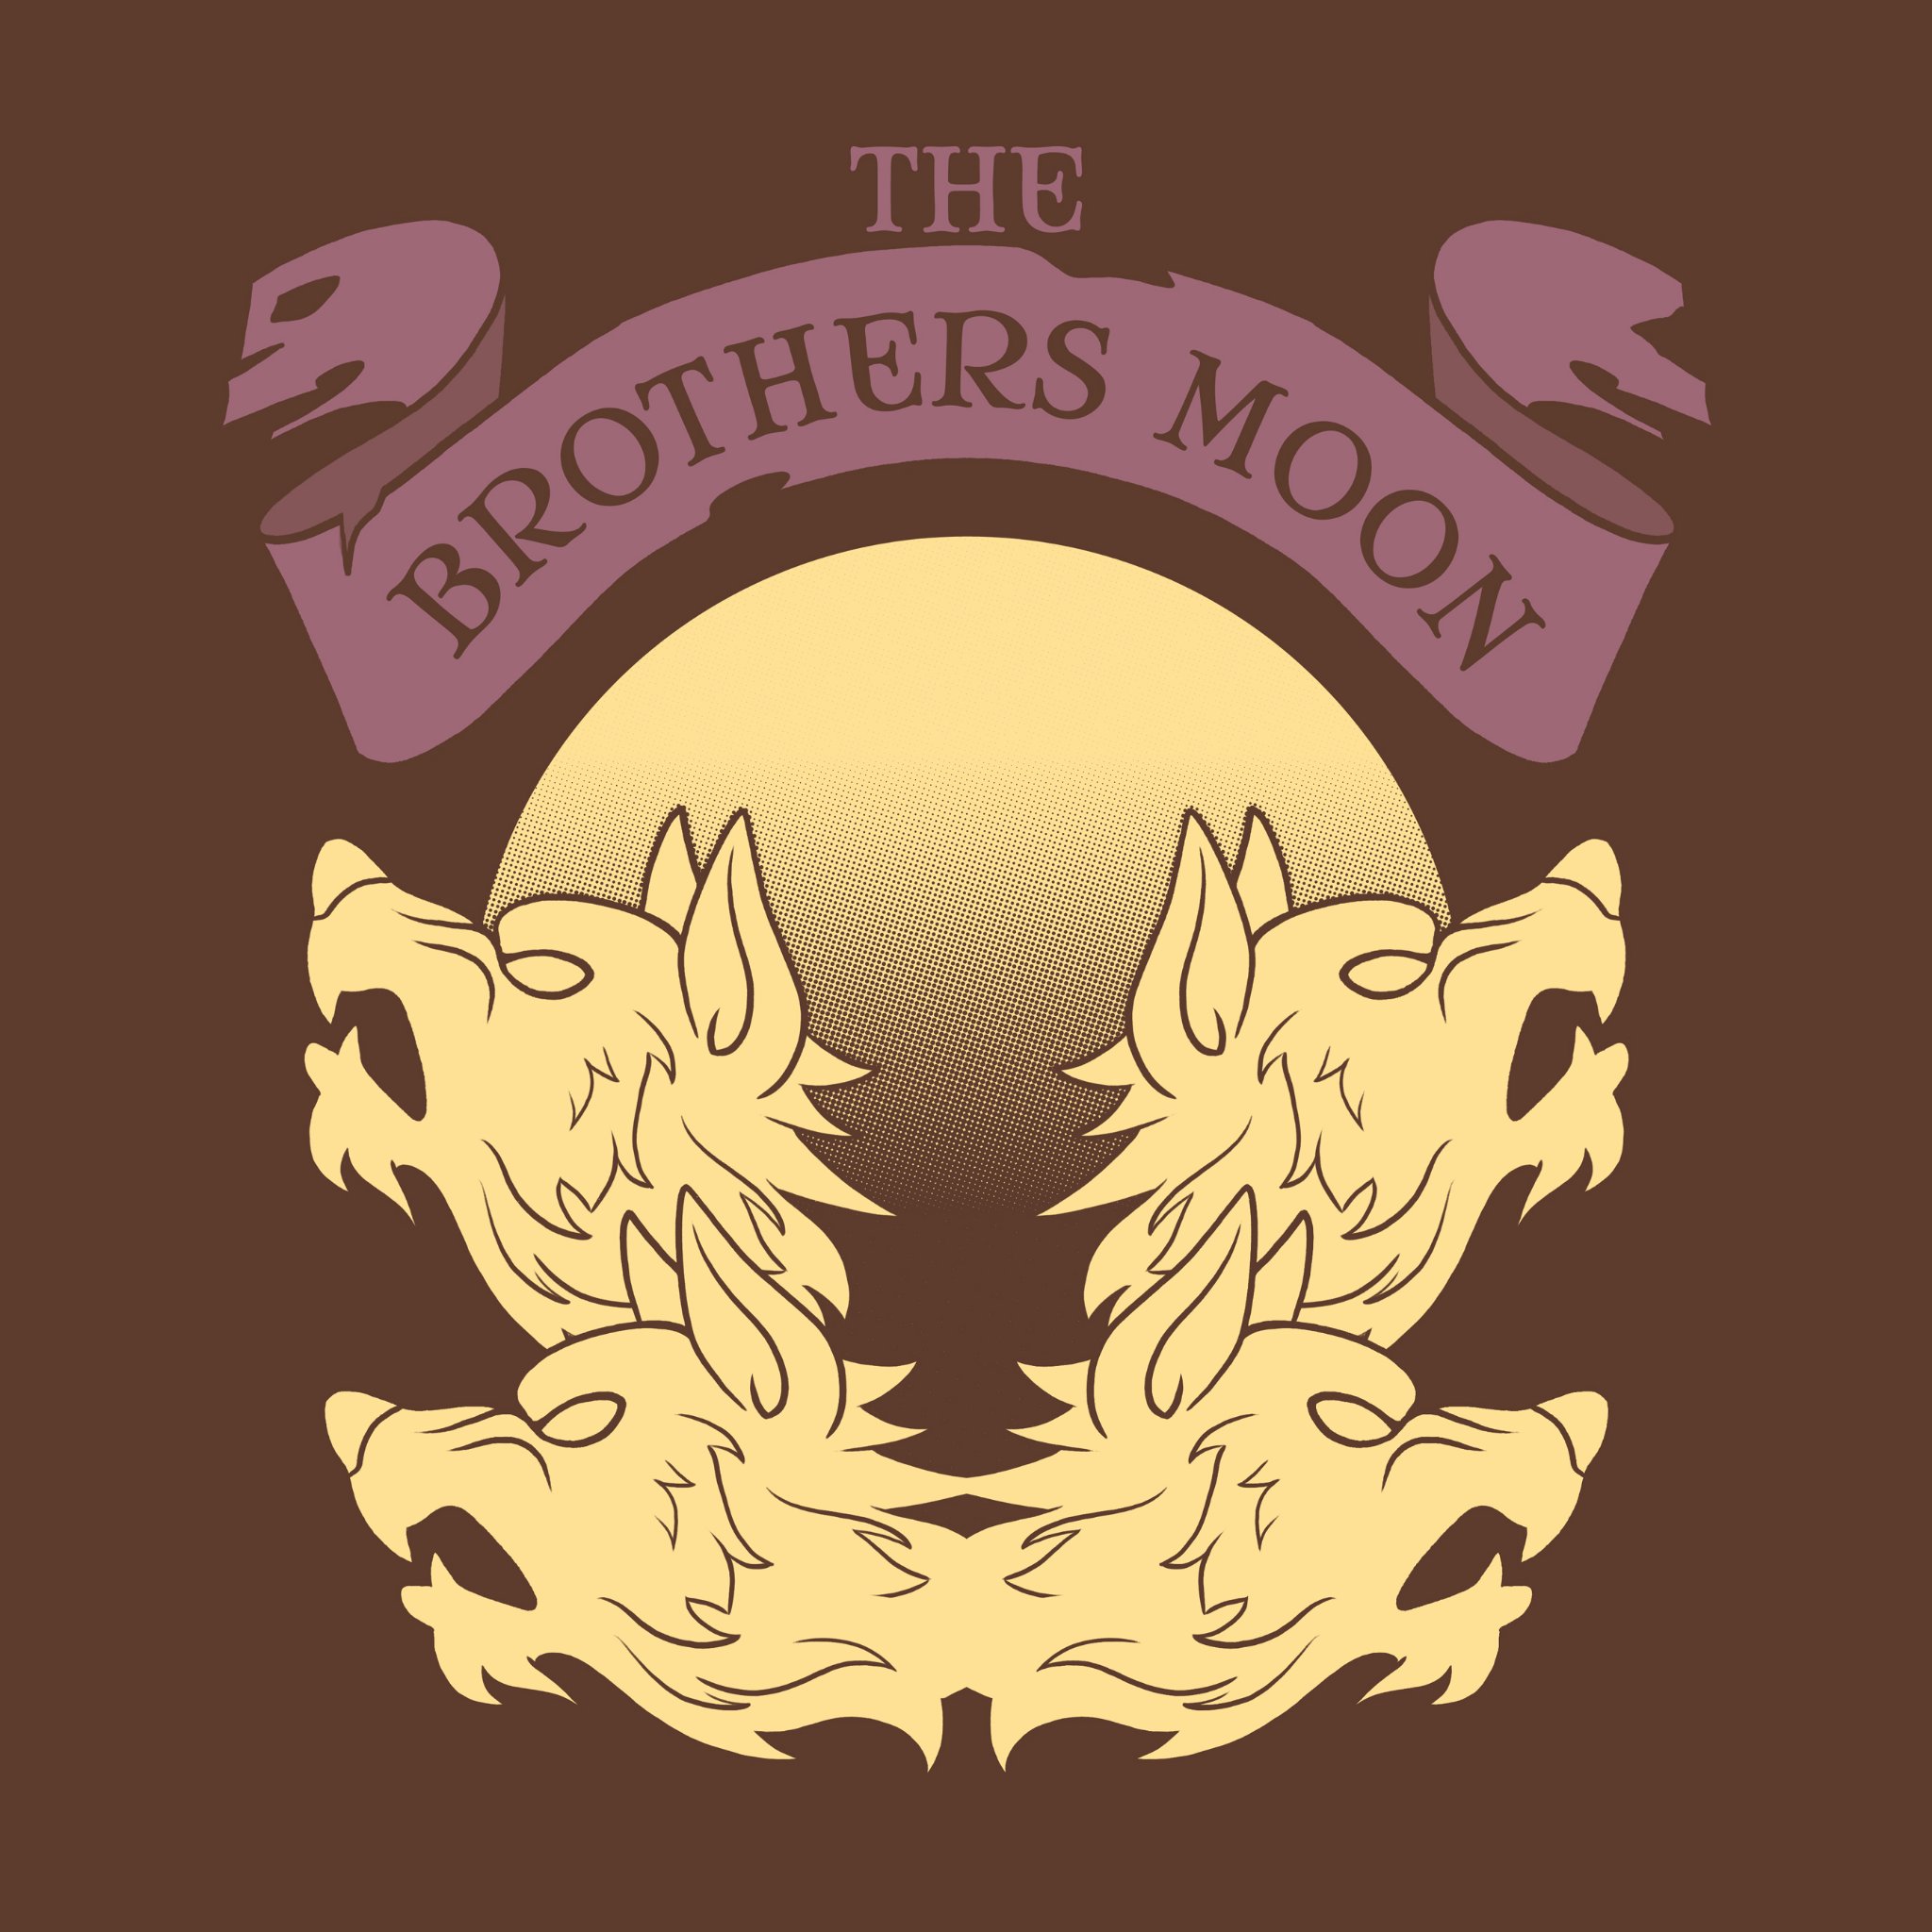 The Brothers Moonさんのプロフィール画像